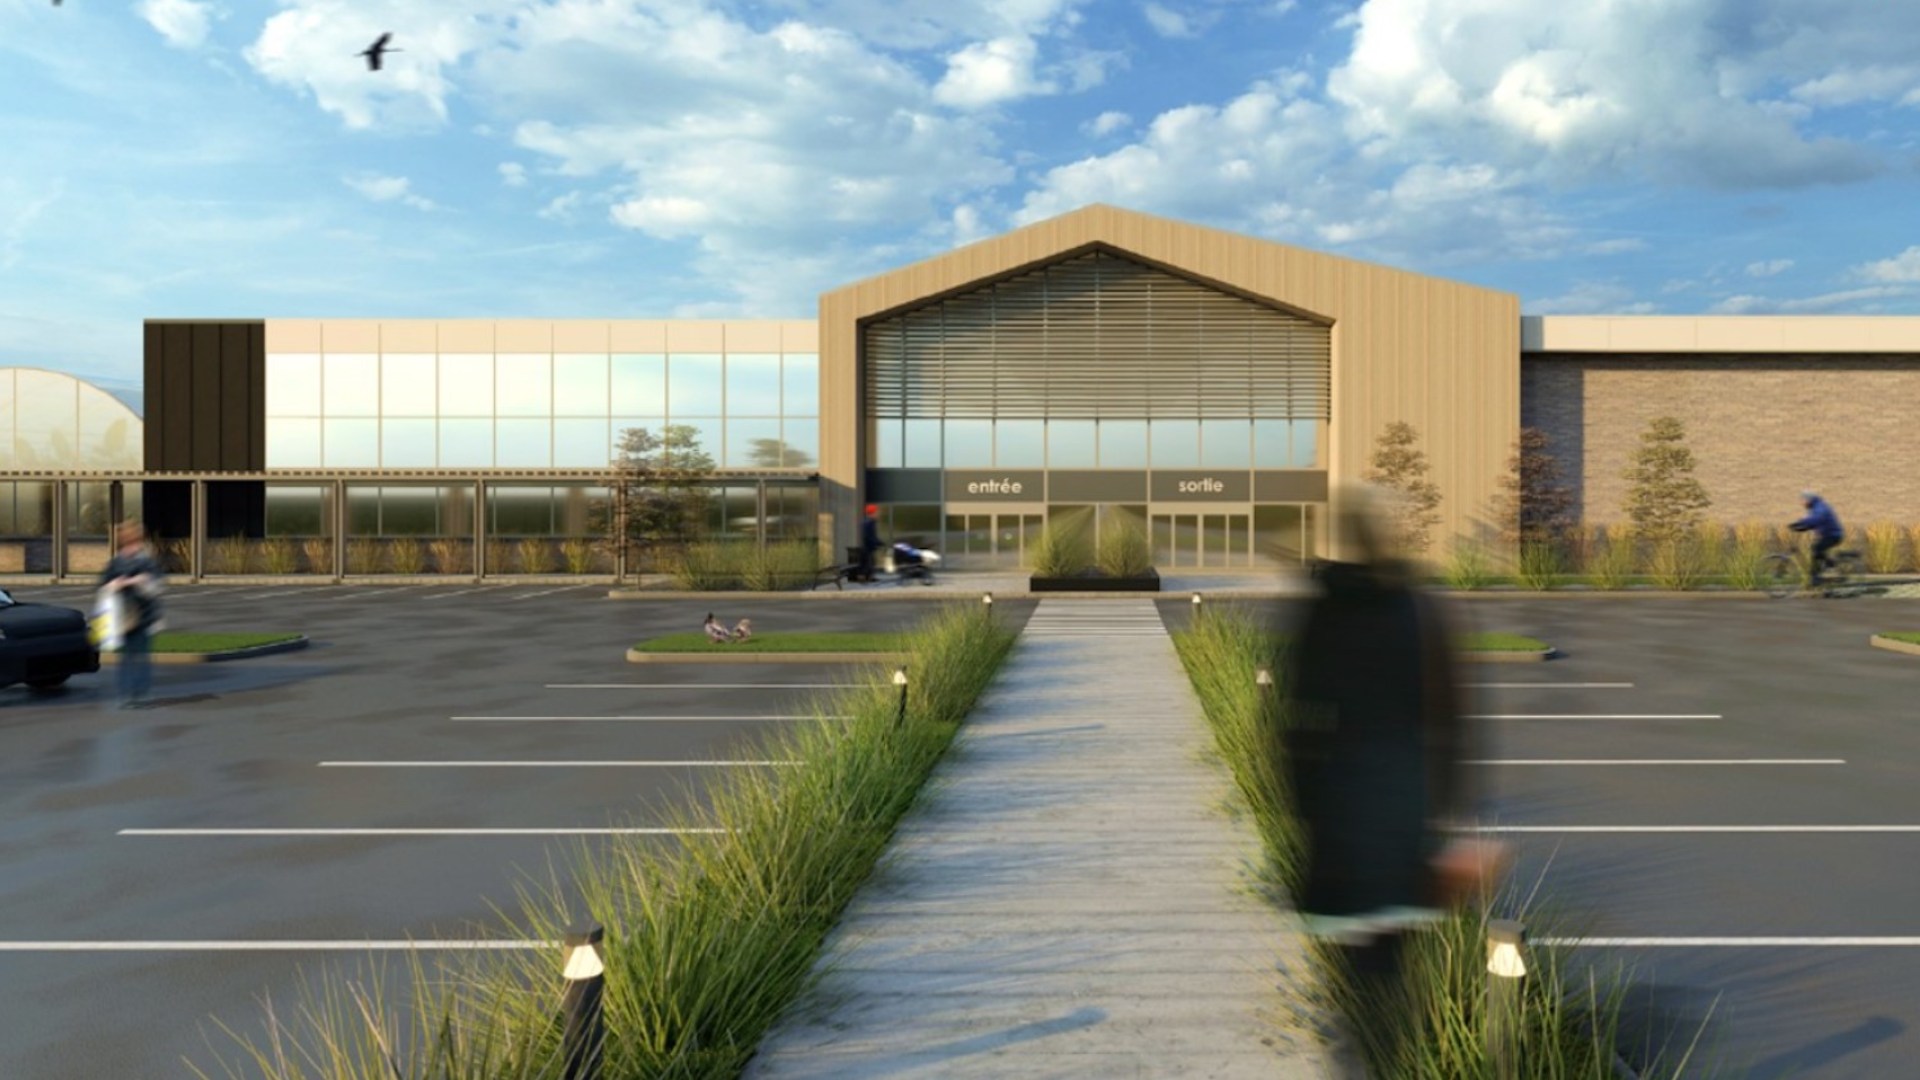 Archipel has raised capital to build a major commercial facility in Montreal